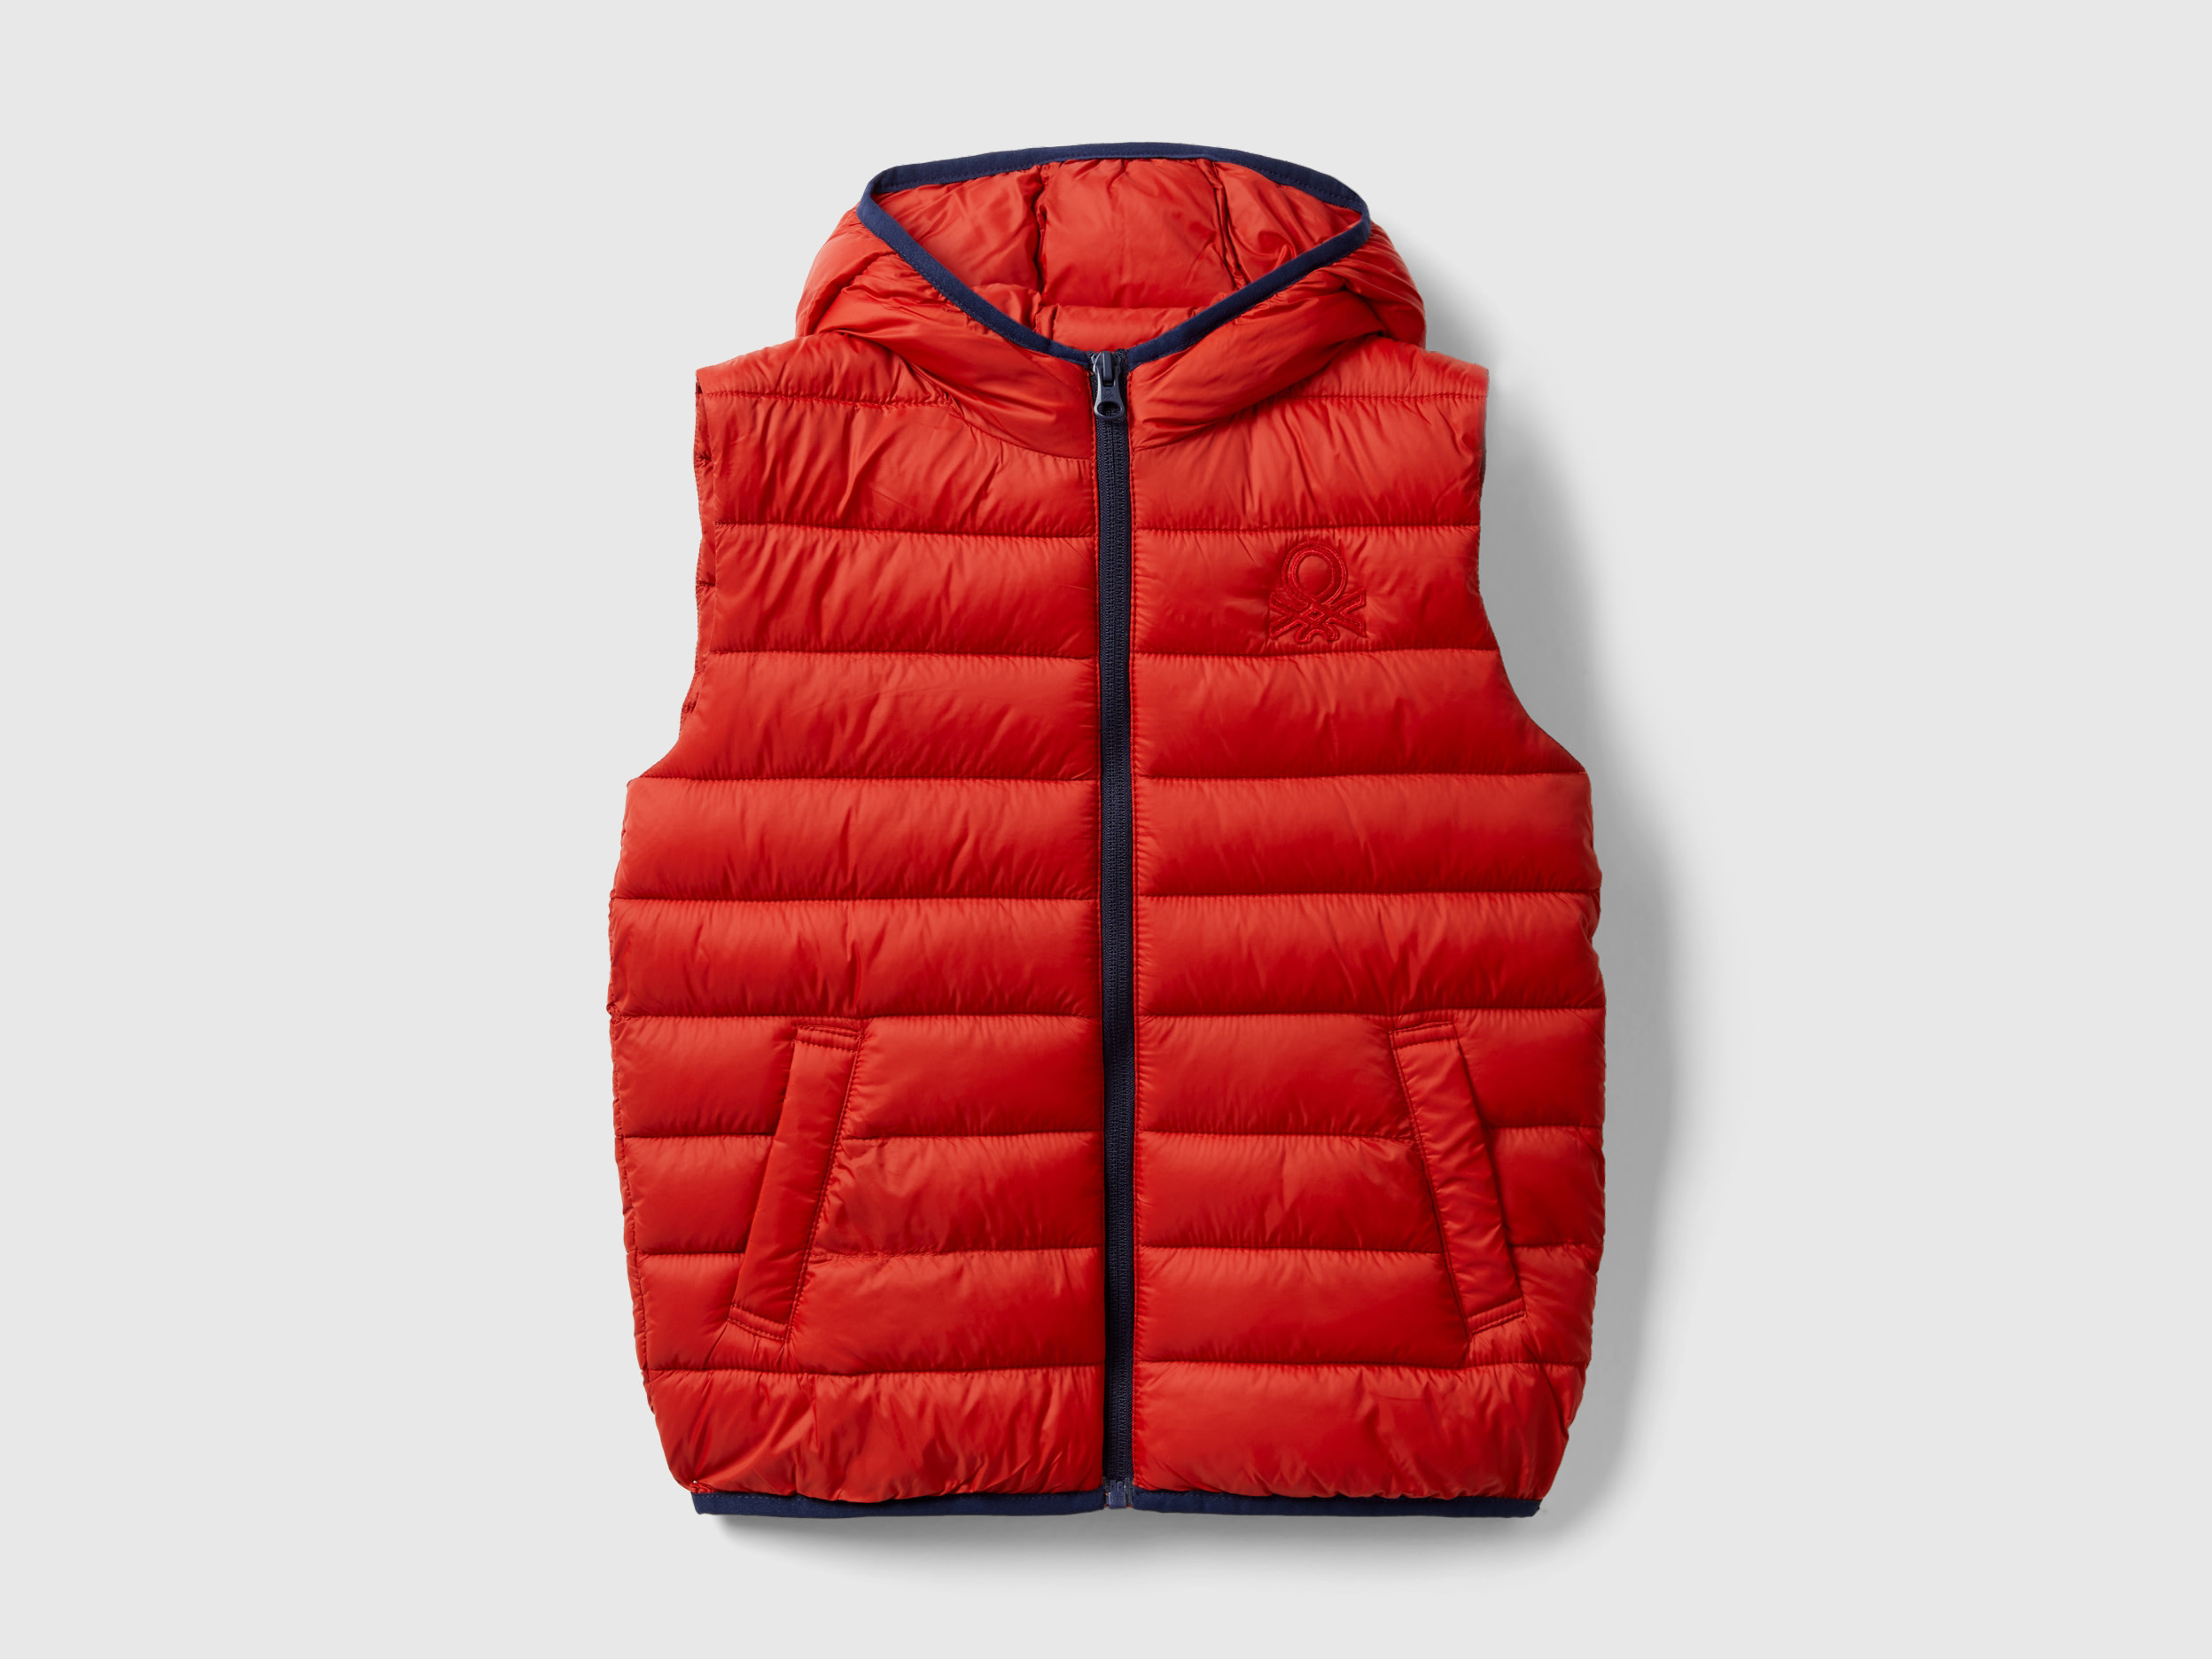 Benetton, Padded Jacket With Hood, size M, Brick Red, Kids